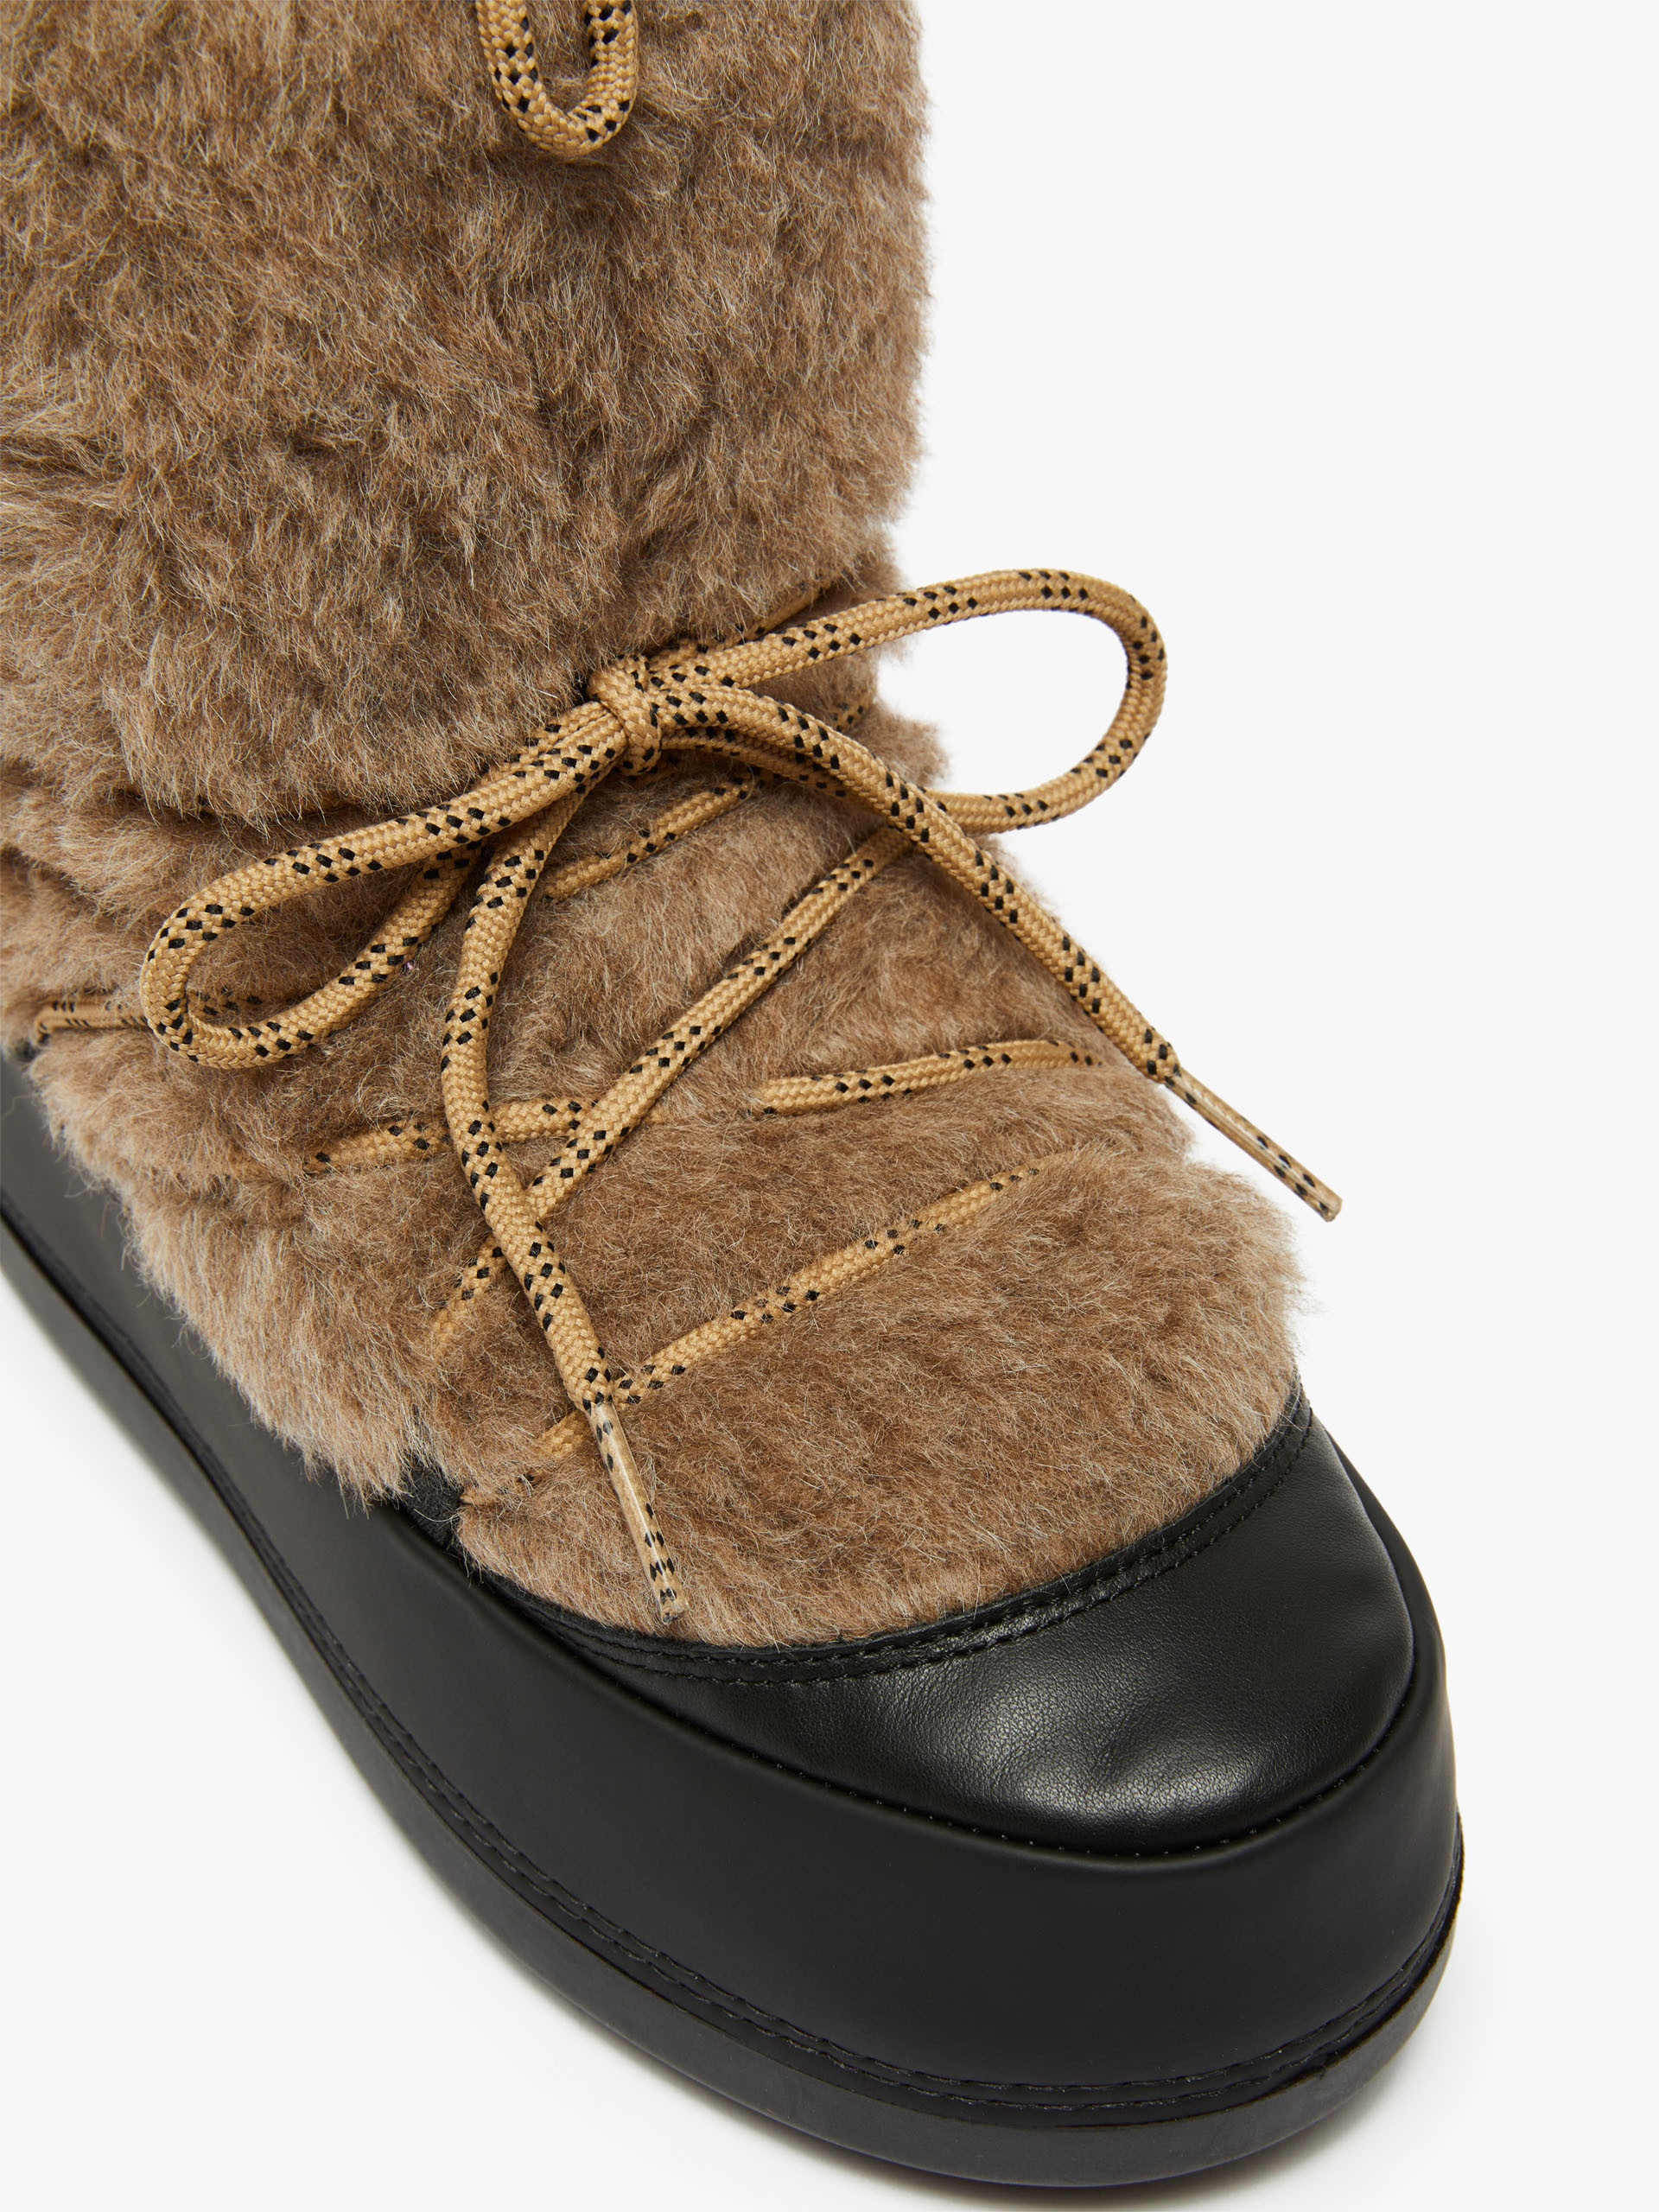 Snow boots in Teddy fabric - 4